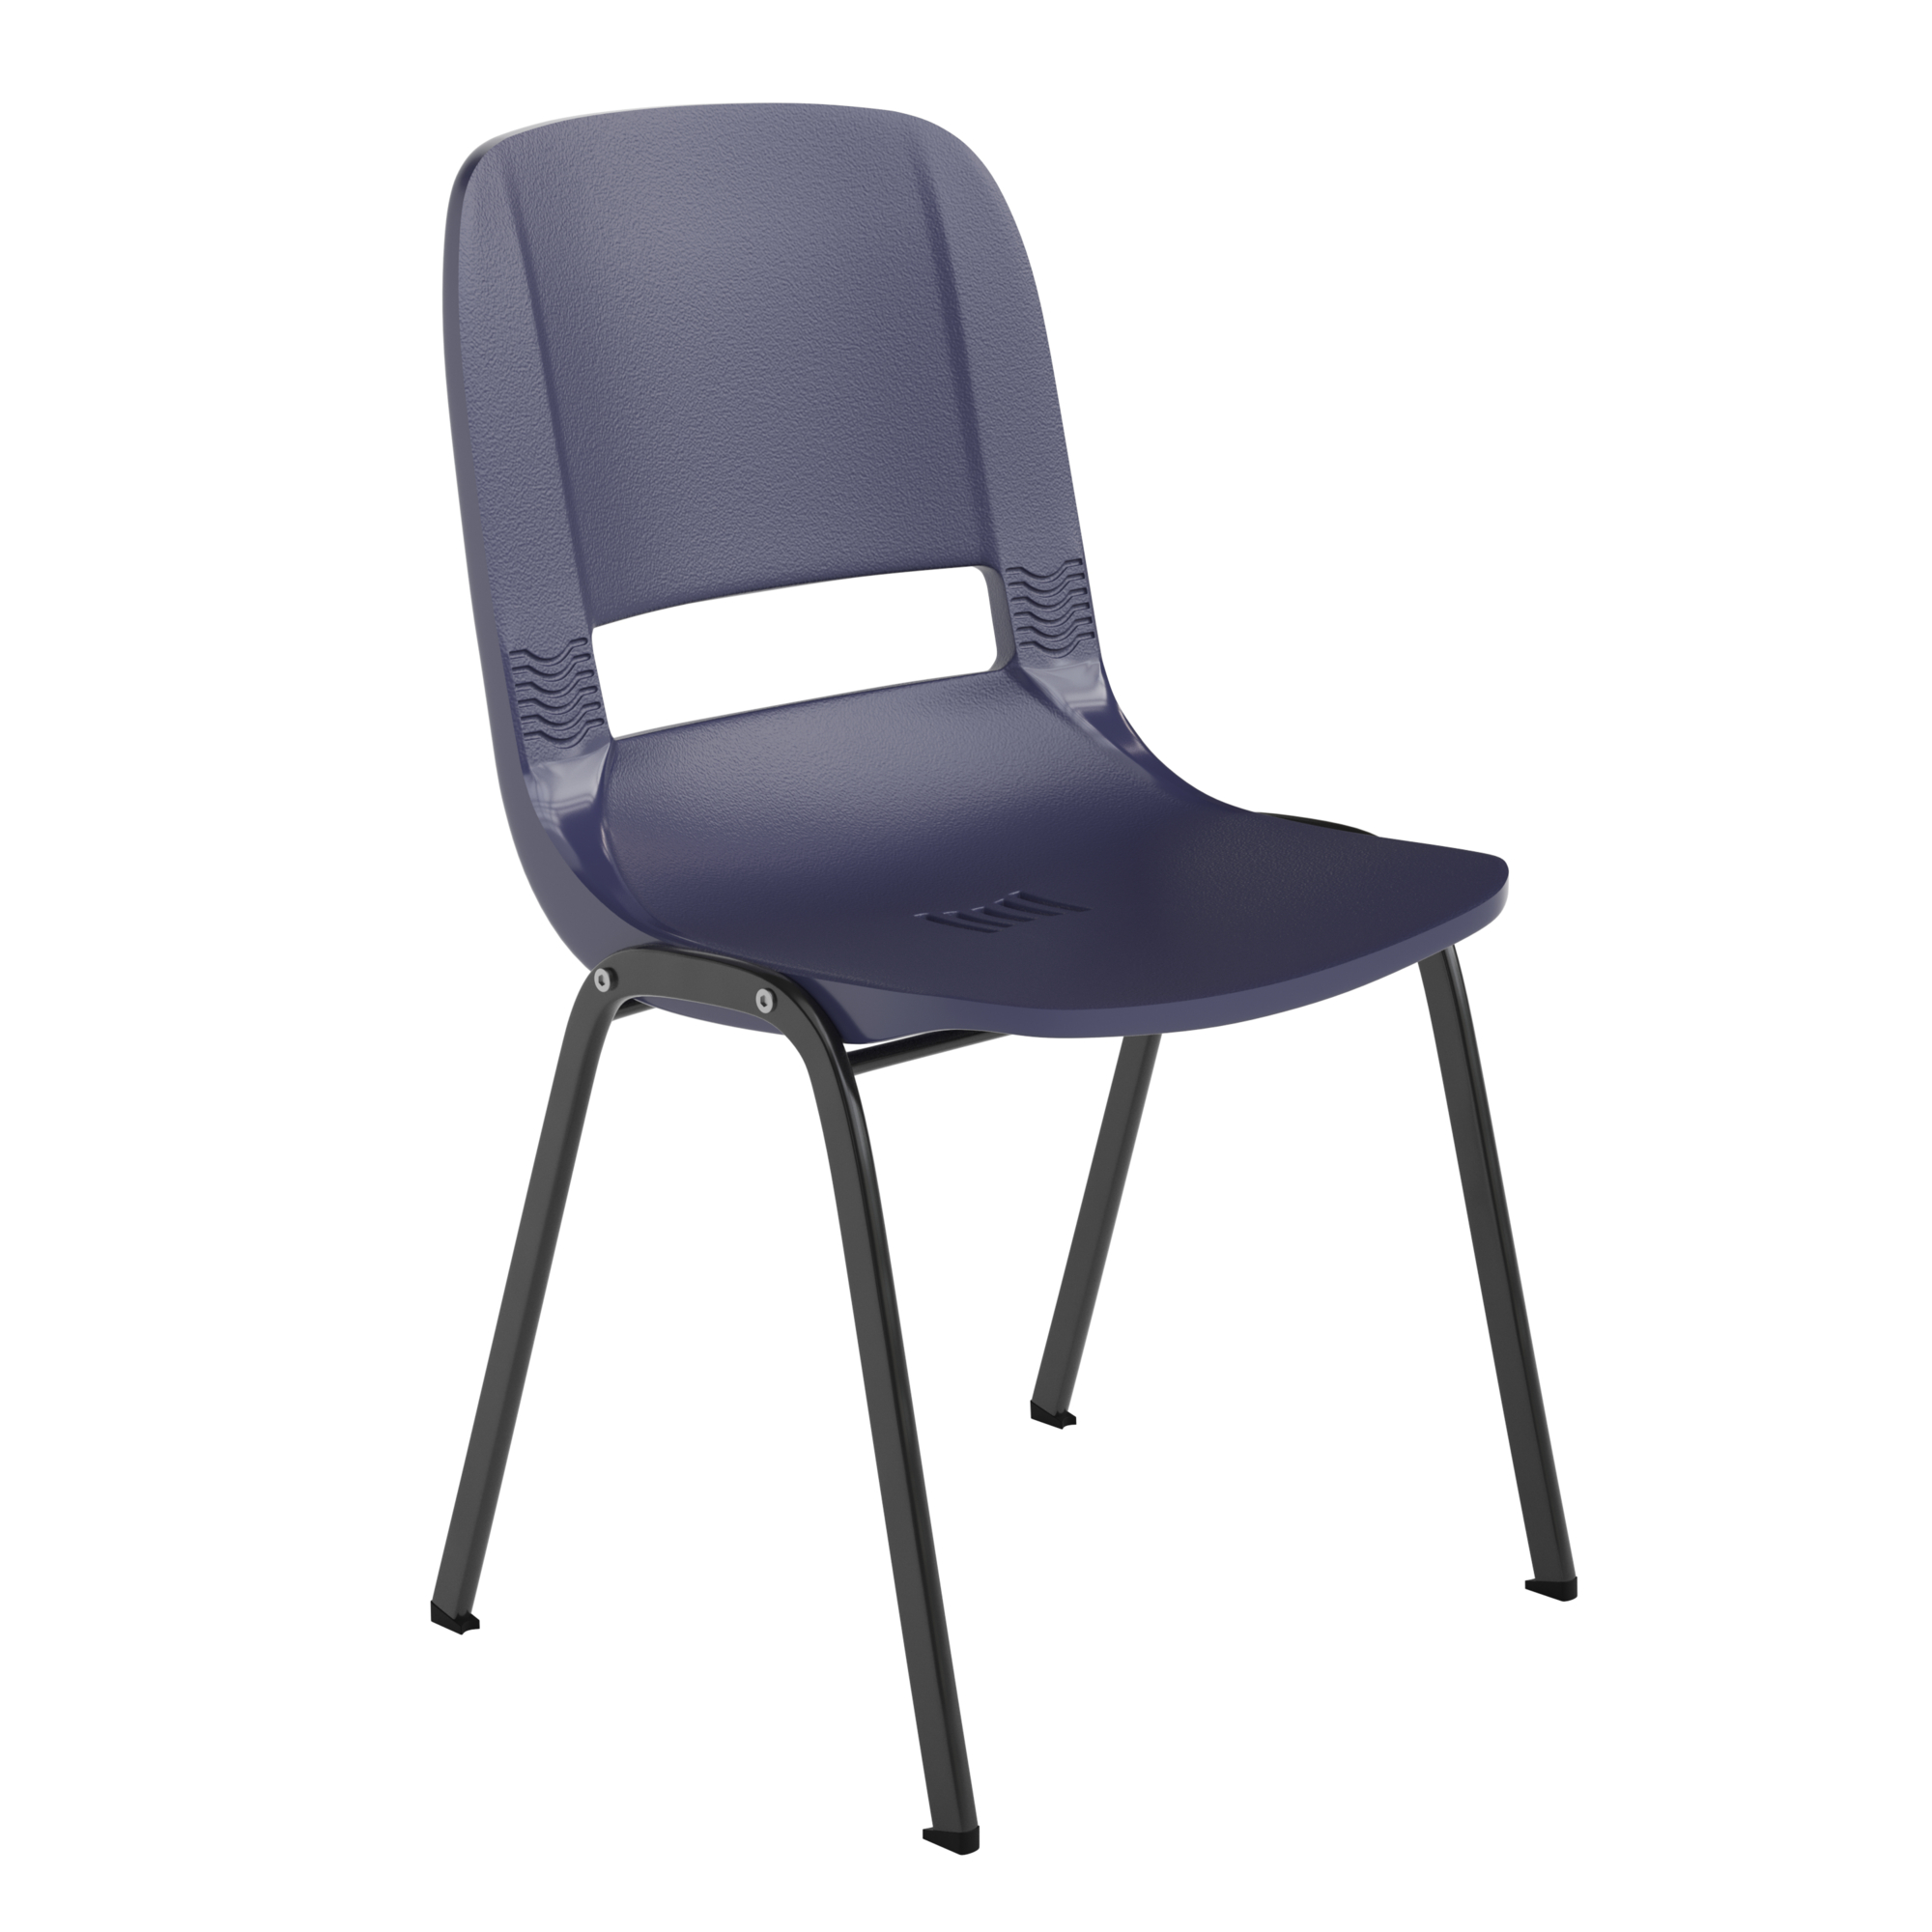 Flash Furniture, 661 lb. Capacity Navy Stack Chair w/ Black Frame, Primary Color Blue, Included (qty.) 1, Model RUT16PDTRUENAVY